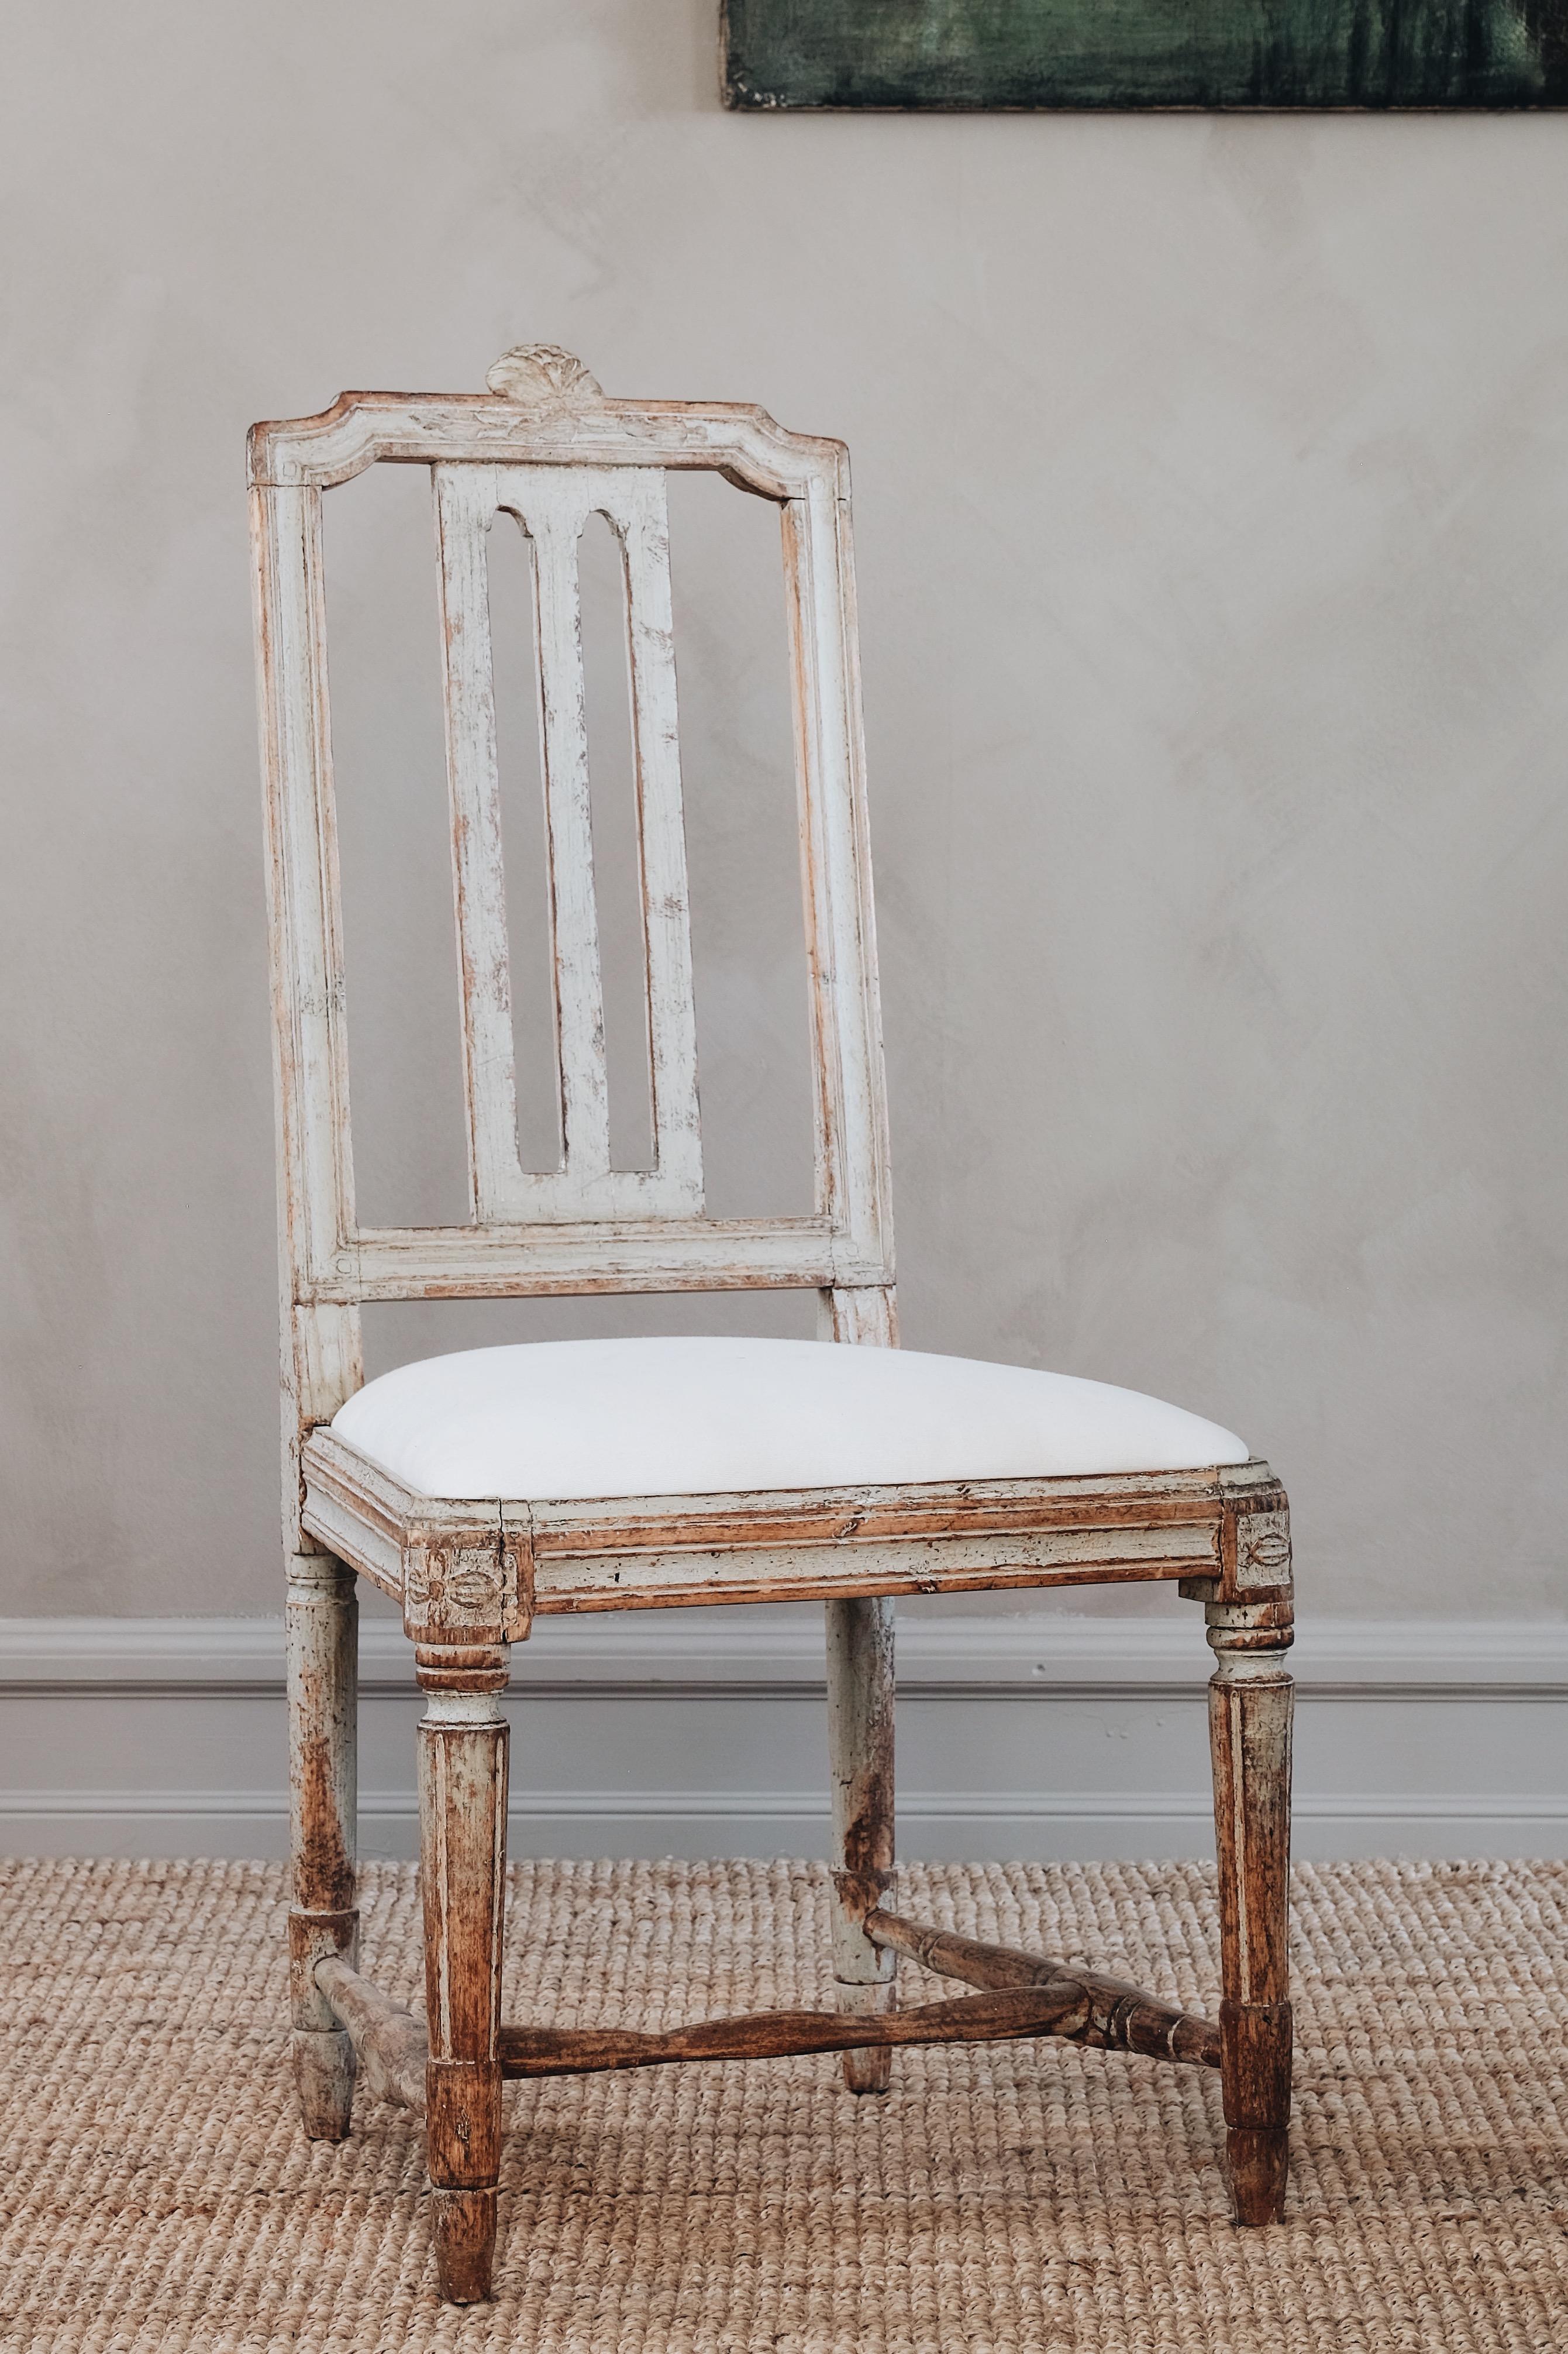 An exceptional set of six matched (4 + 2) 18th century Gustavian dining chairs in original color with a great patinated surface. Stockholm, Sweden, circa 1790. 

Very good condition with wear consistent with age and use.